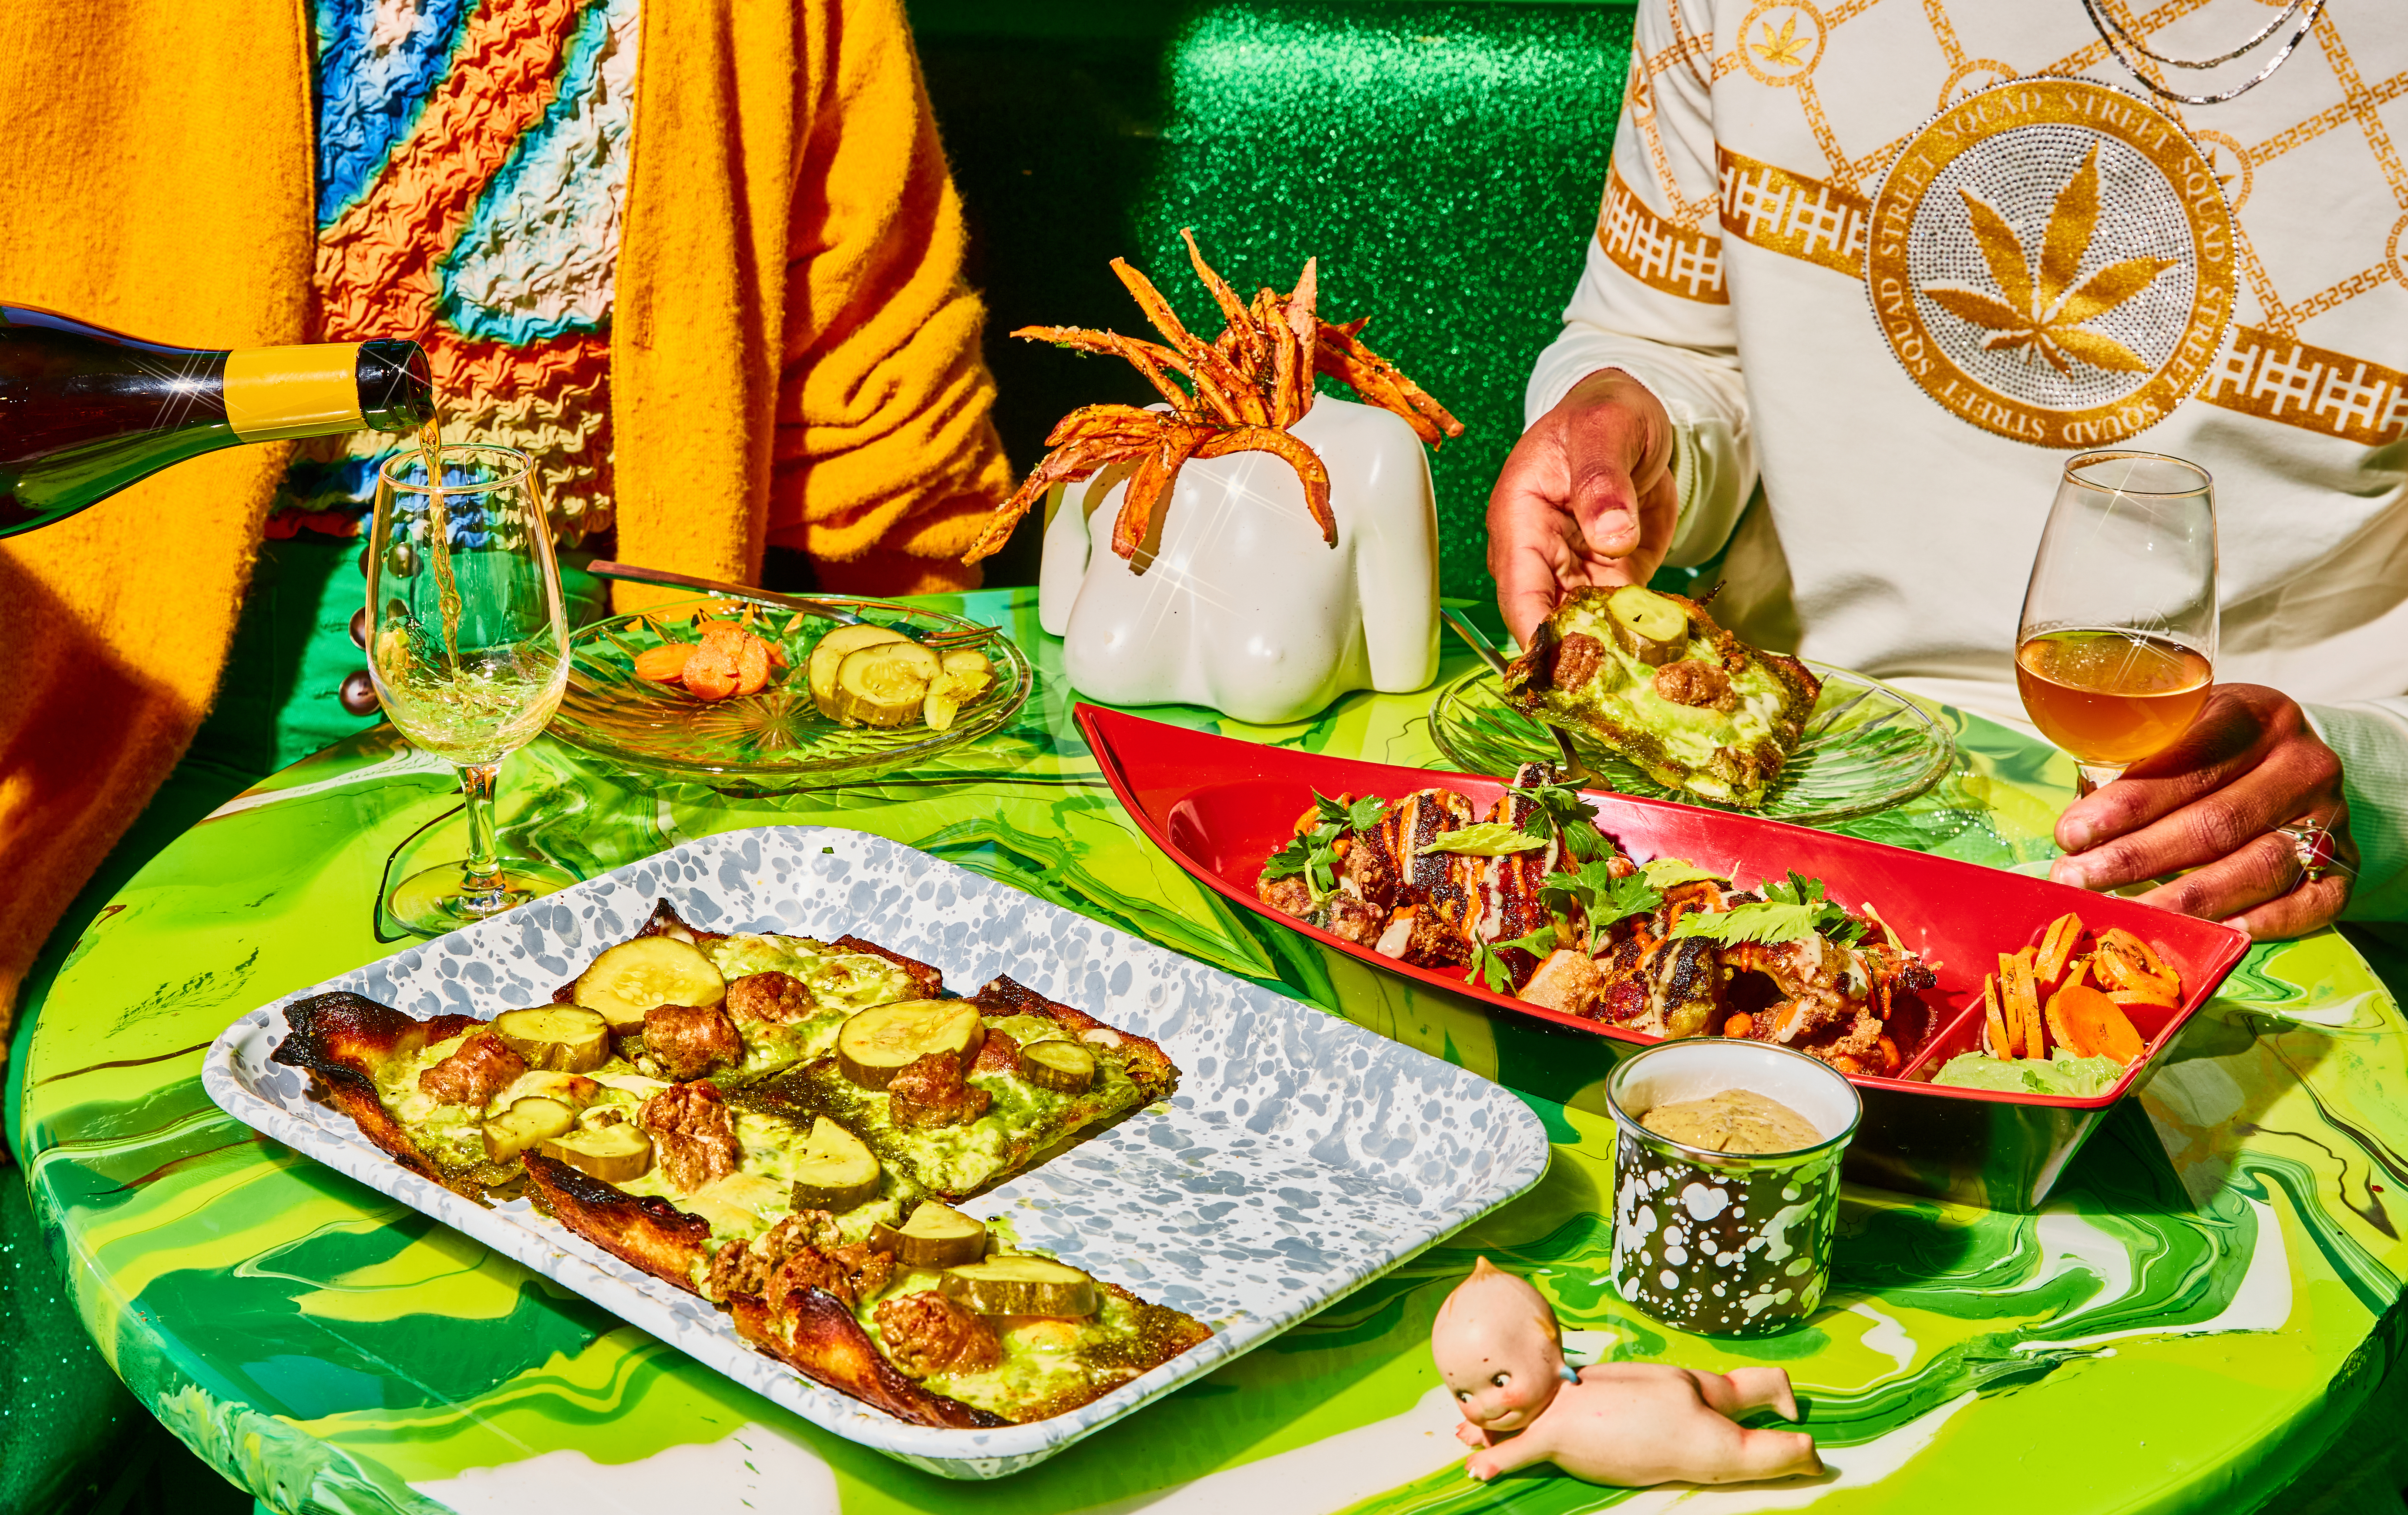 Diners sit in a bright green booth at a bright green swirled tabletop. On the table there’s a full rectangular pizza, a large red plastic boat full of grilled chicken, sweet potato fries served in a headless bust, and wine.